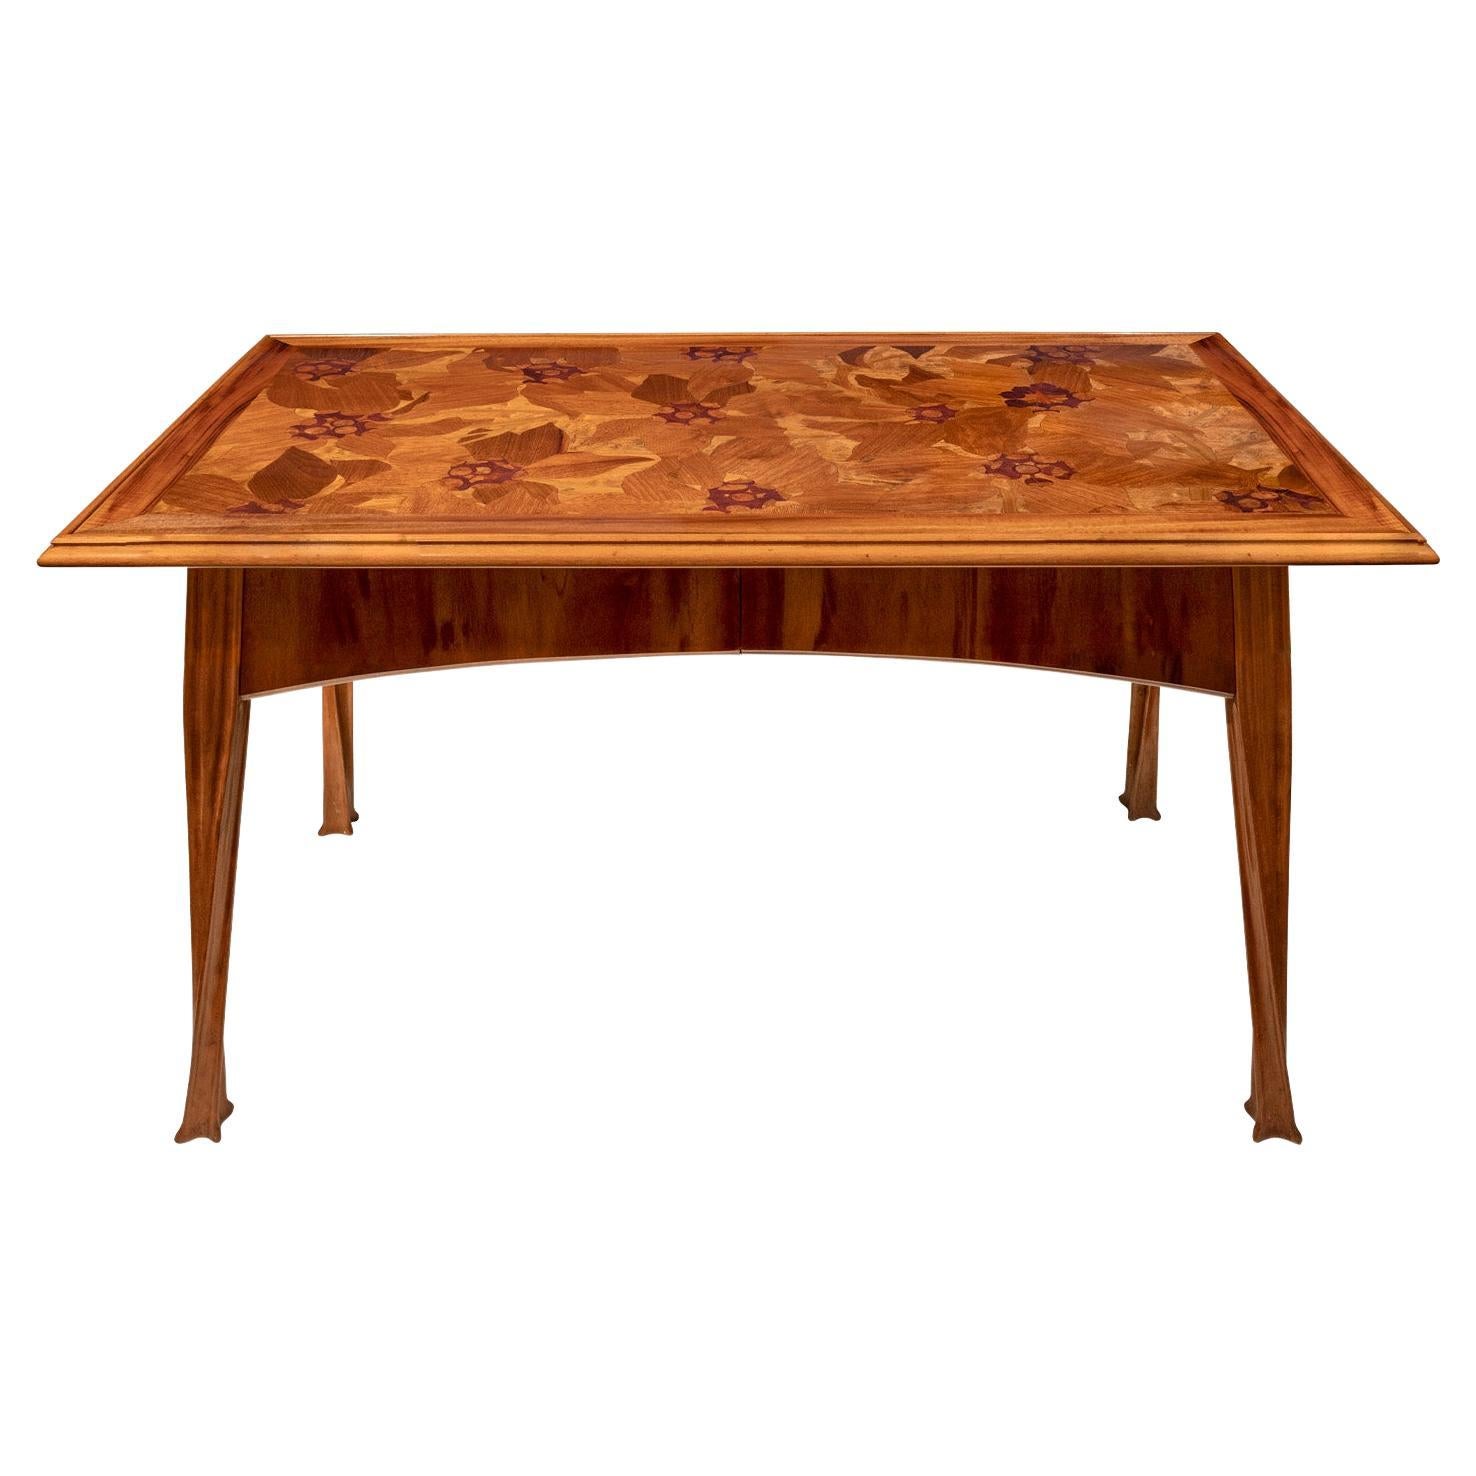 Louis Majorelle Rare Writing Desk with Botanical Inlays ca. 1900 (Signed) For Sale